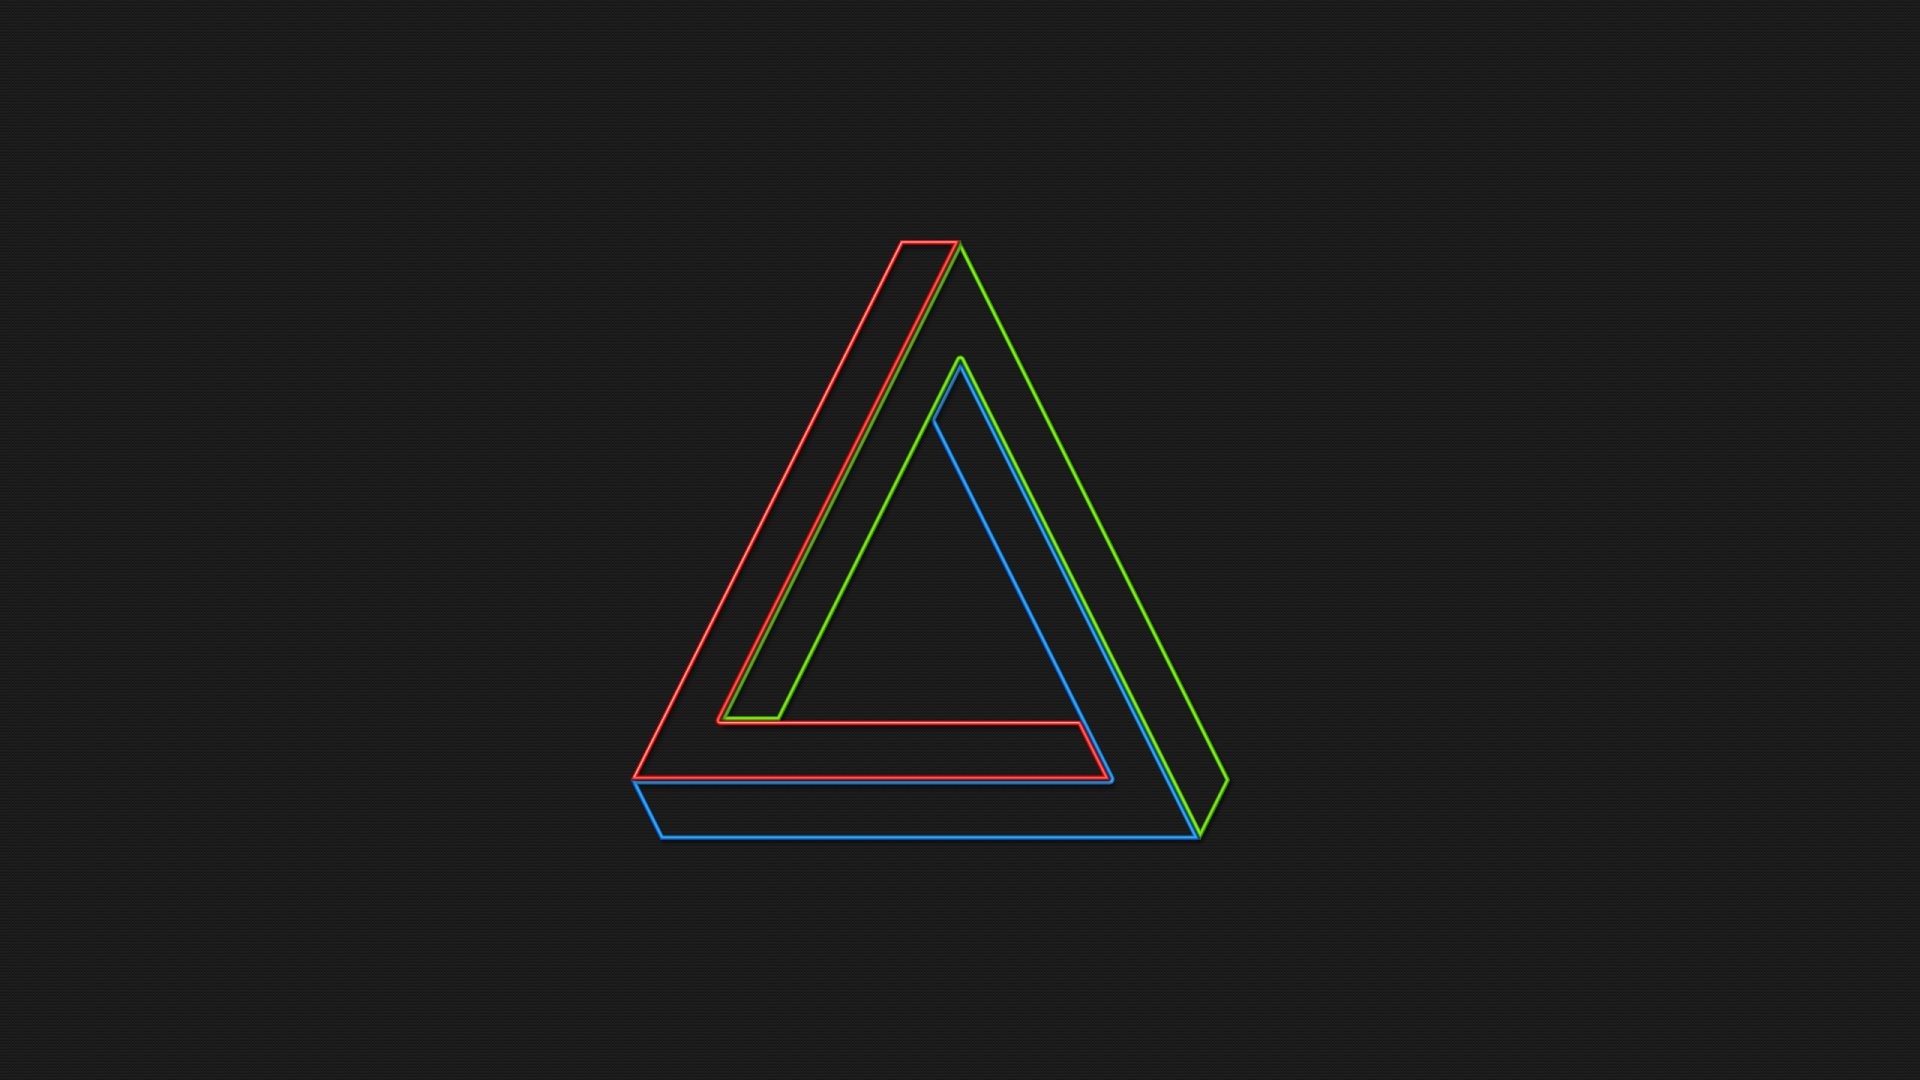 General 1920x1080 Penrose triangle triangle minimalism simple background black background geometric figures geometry abstract